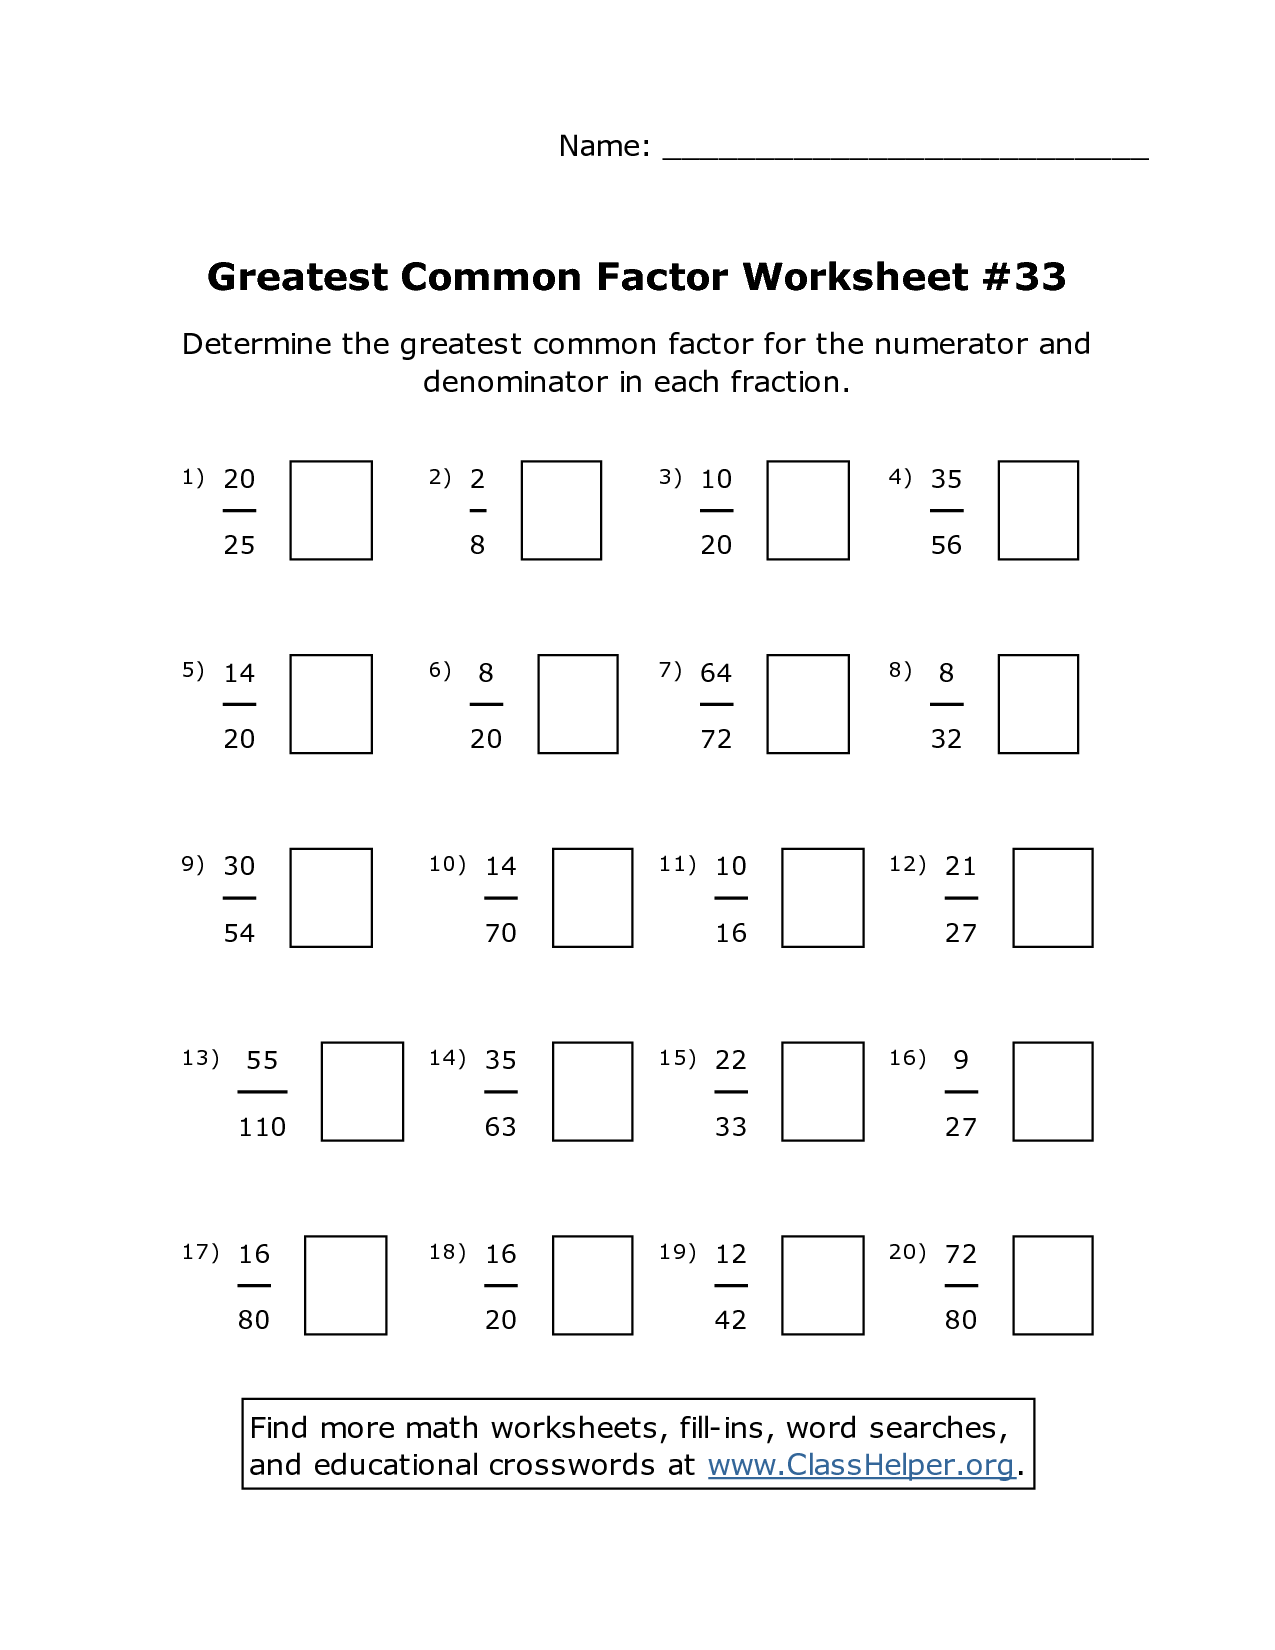 13 Best Images of Greatest Common Factor Worksheet Answers Greatest ...